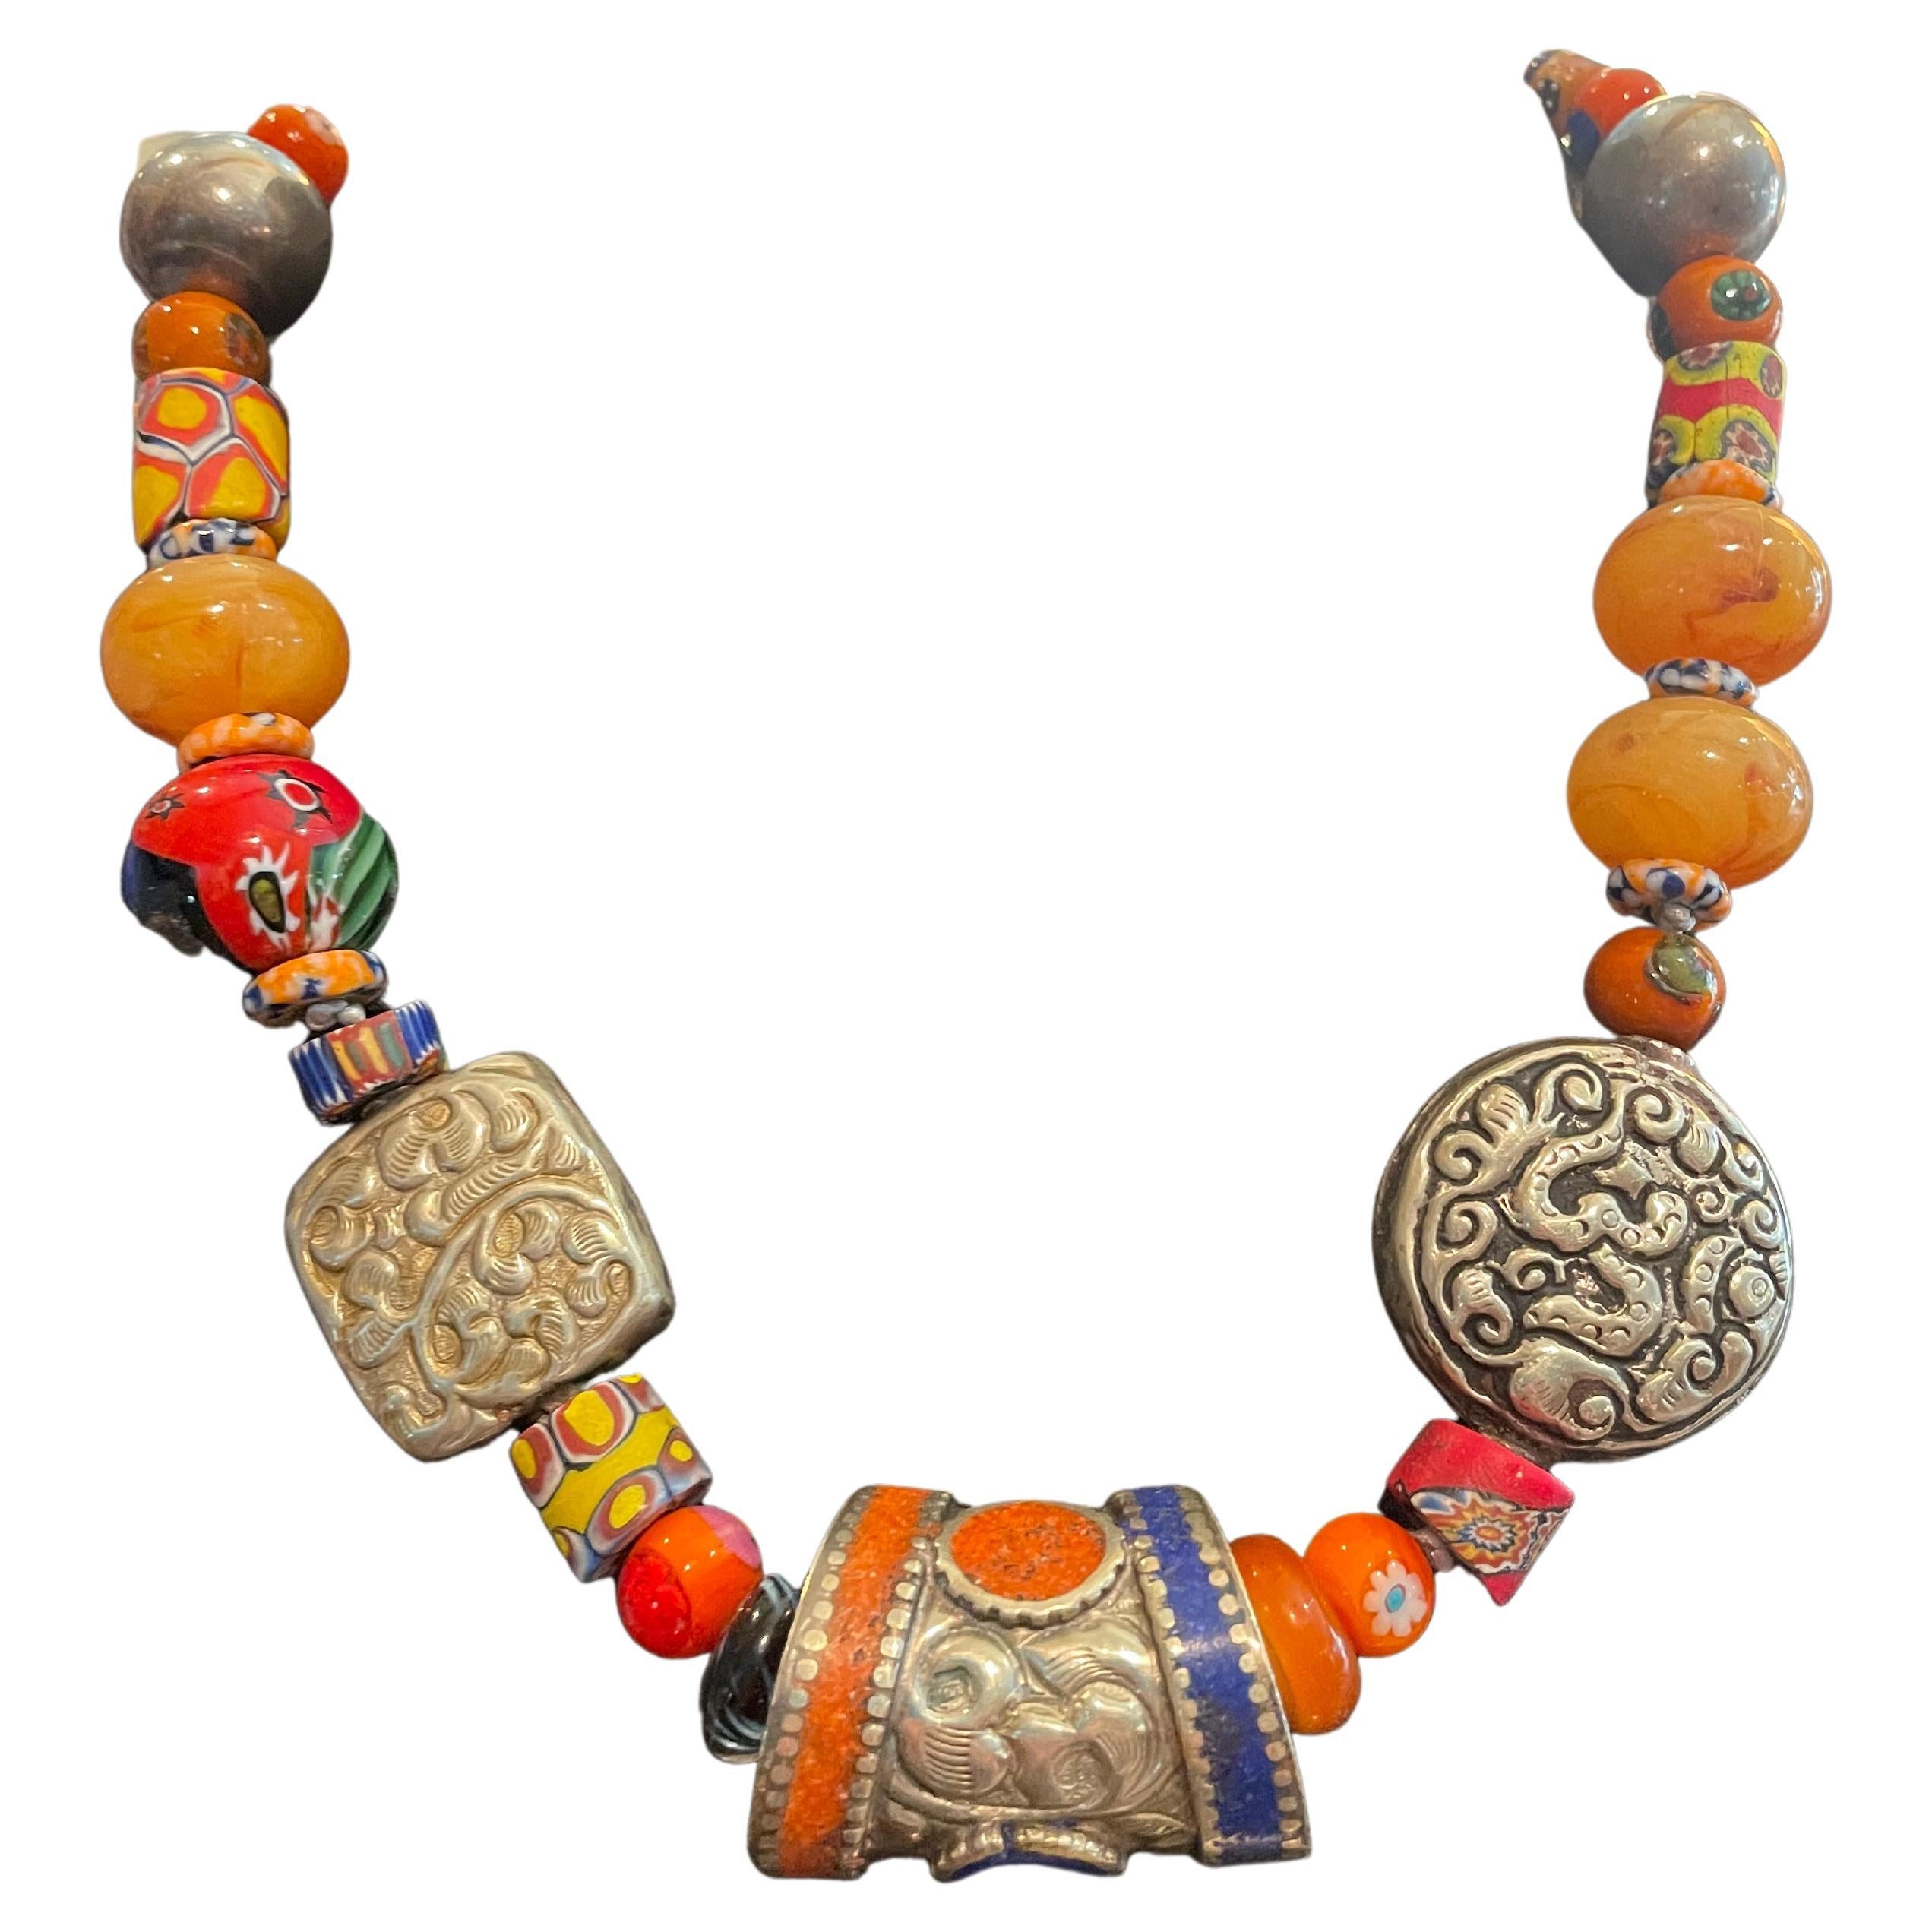 LB Tribal style necklace Tibetan silver Afghani inlaid Venetian trade bead amber For Sale